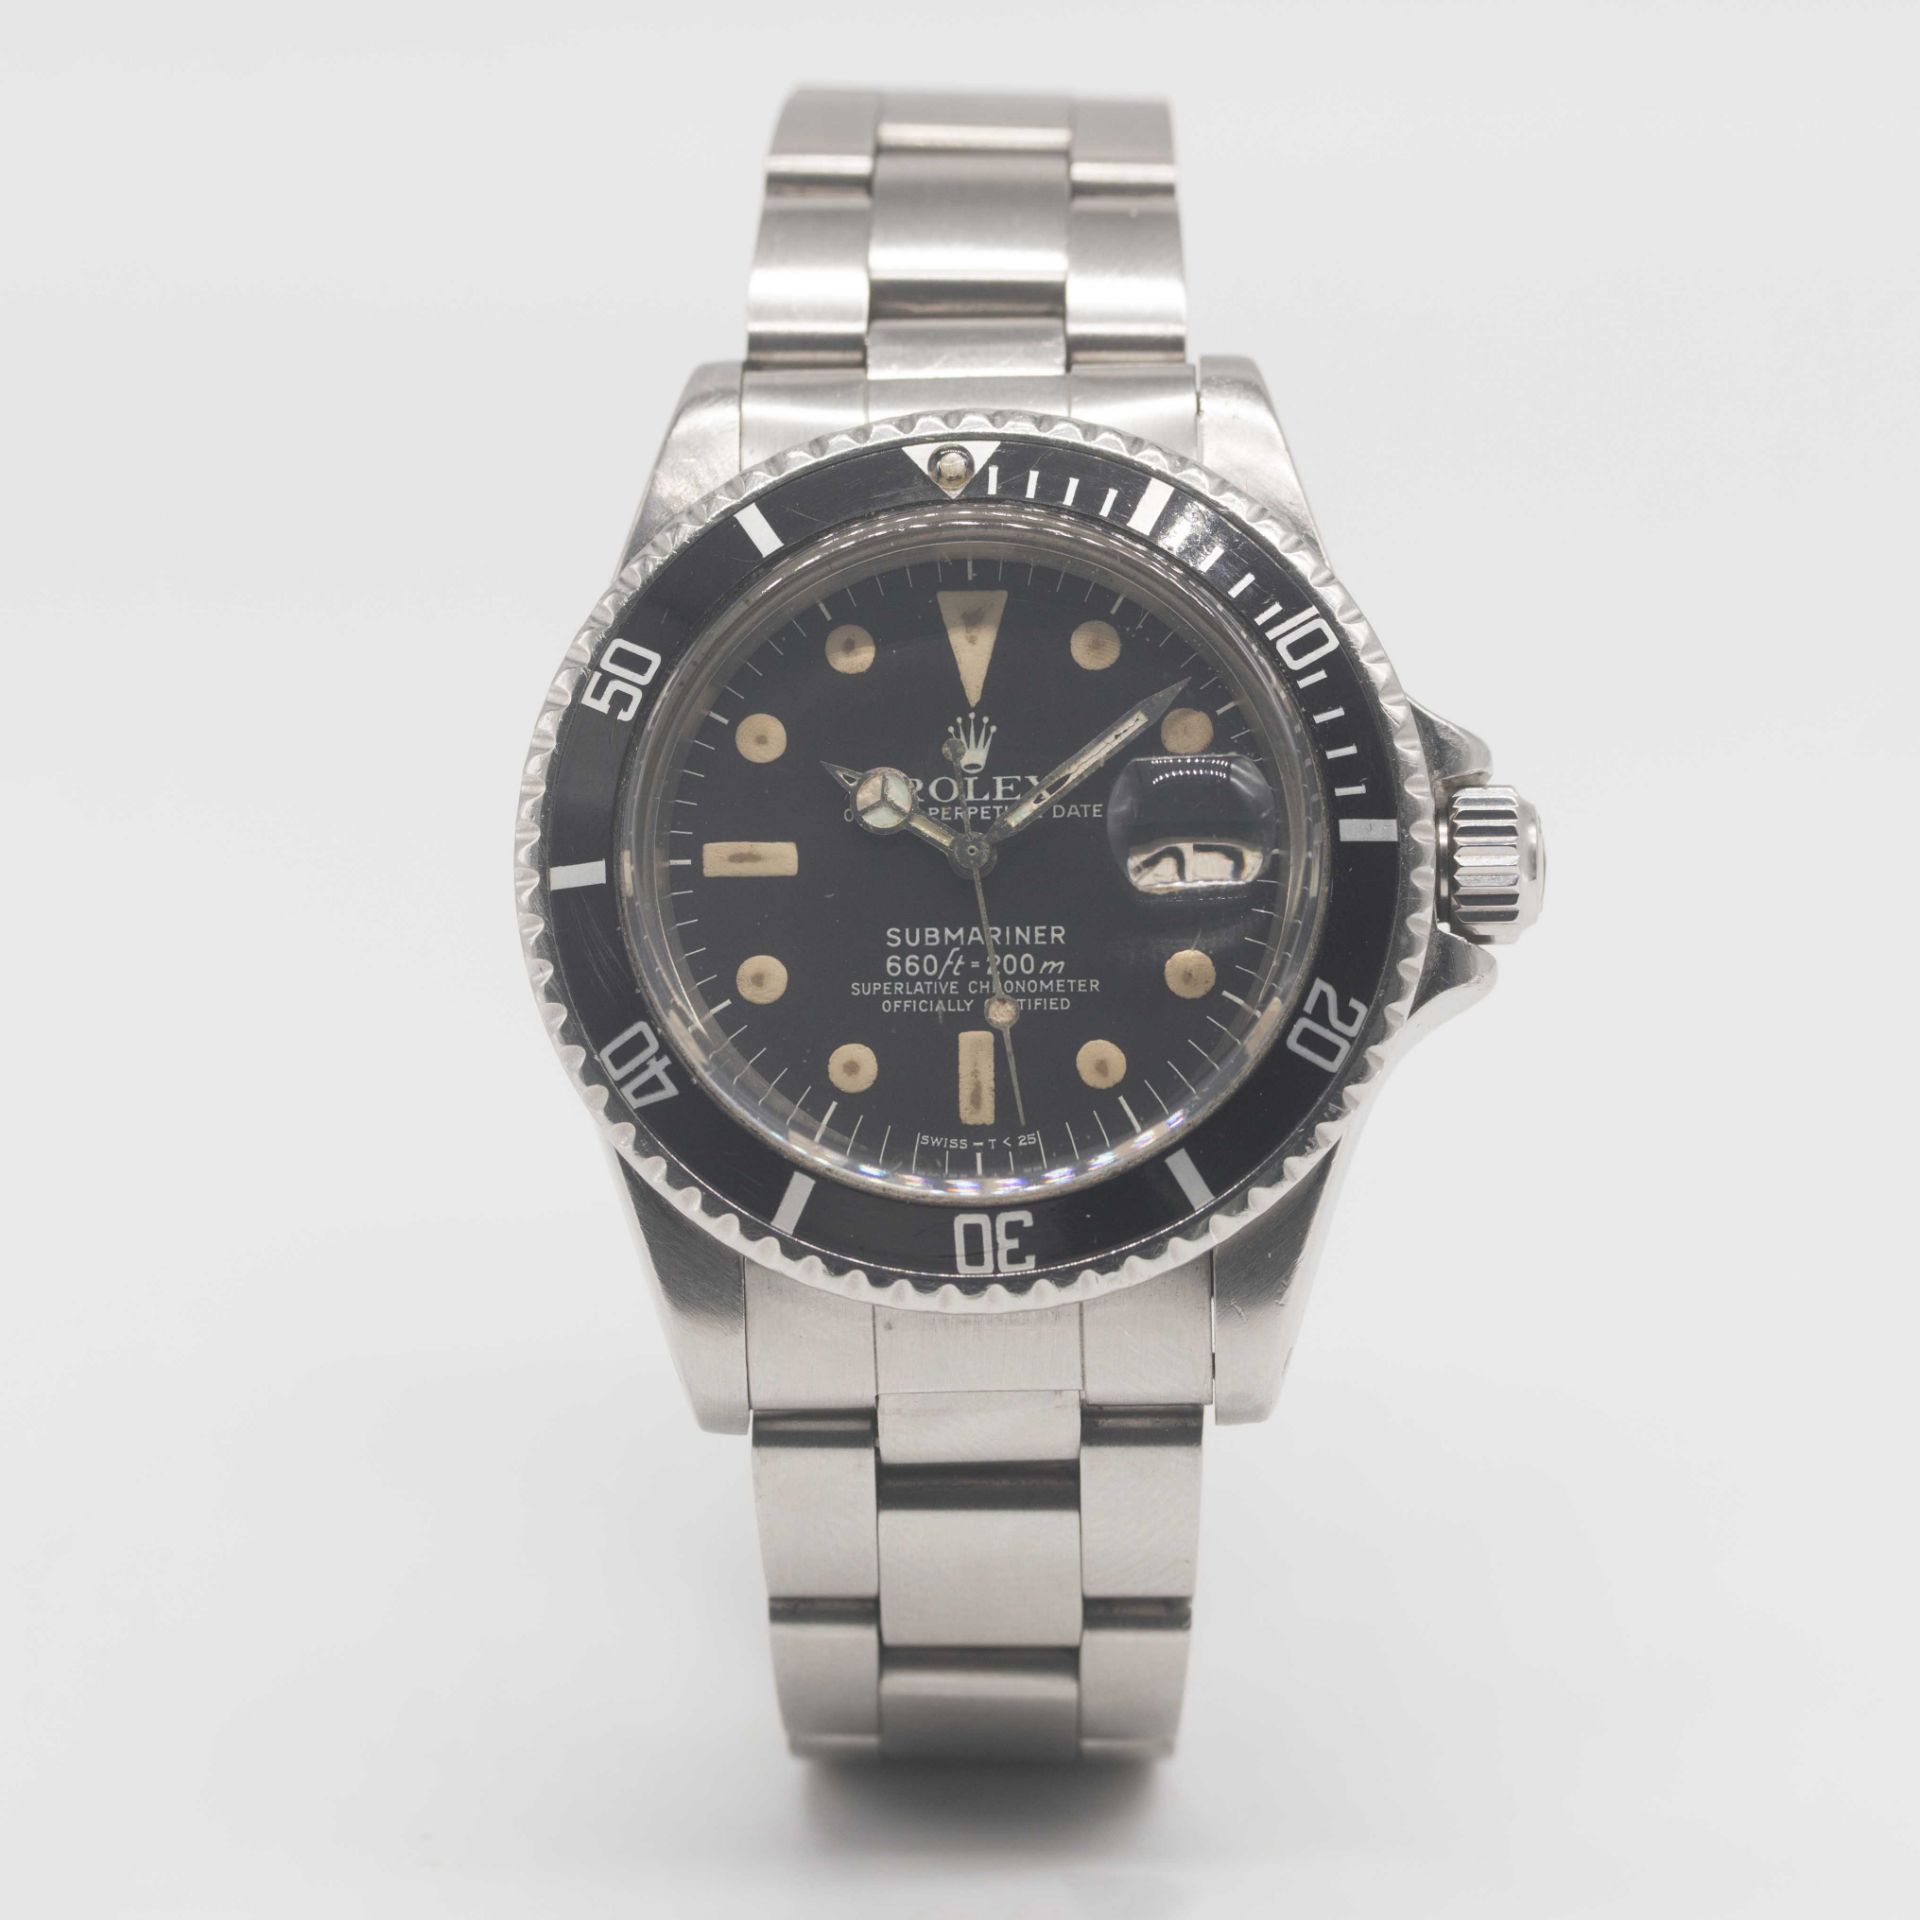 A GENTLEMAN'S STAINLESS STEEL ROLEX OYSTER PERPETUAL DATE SUBMARINER BRACELET WATCH CIRCA 1978, REF. - Image 2 of 10